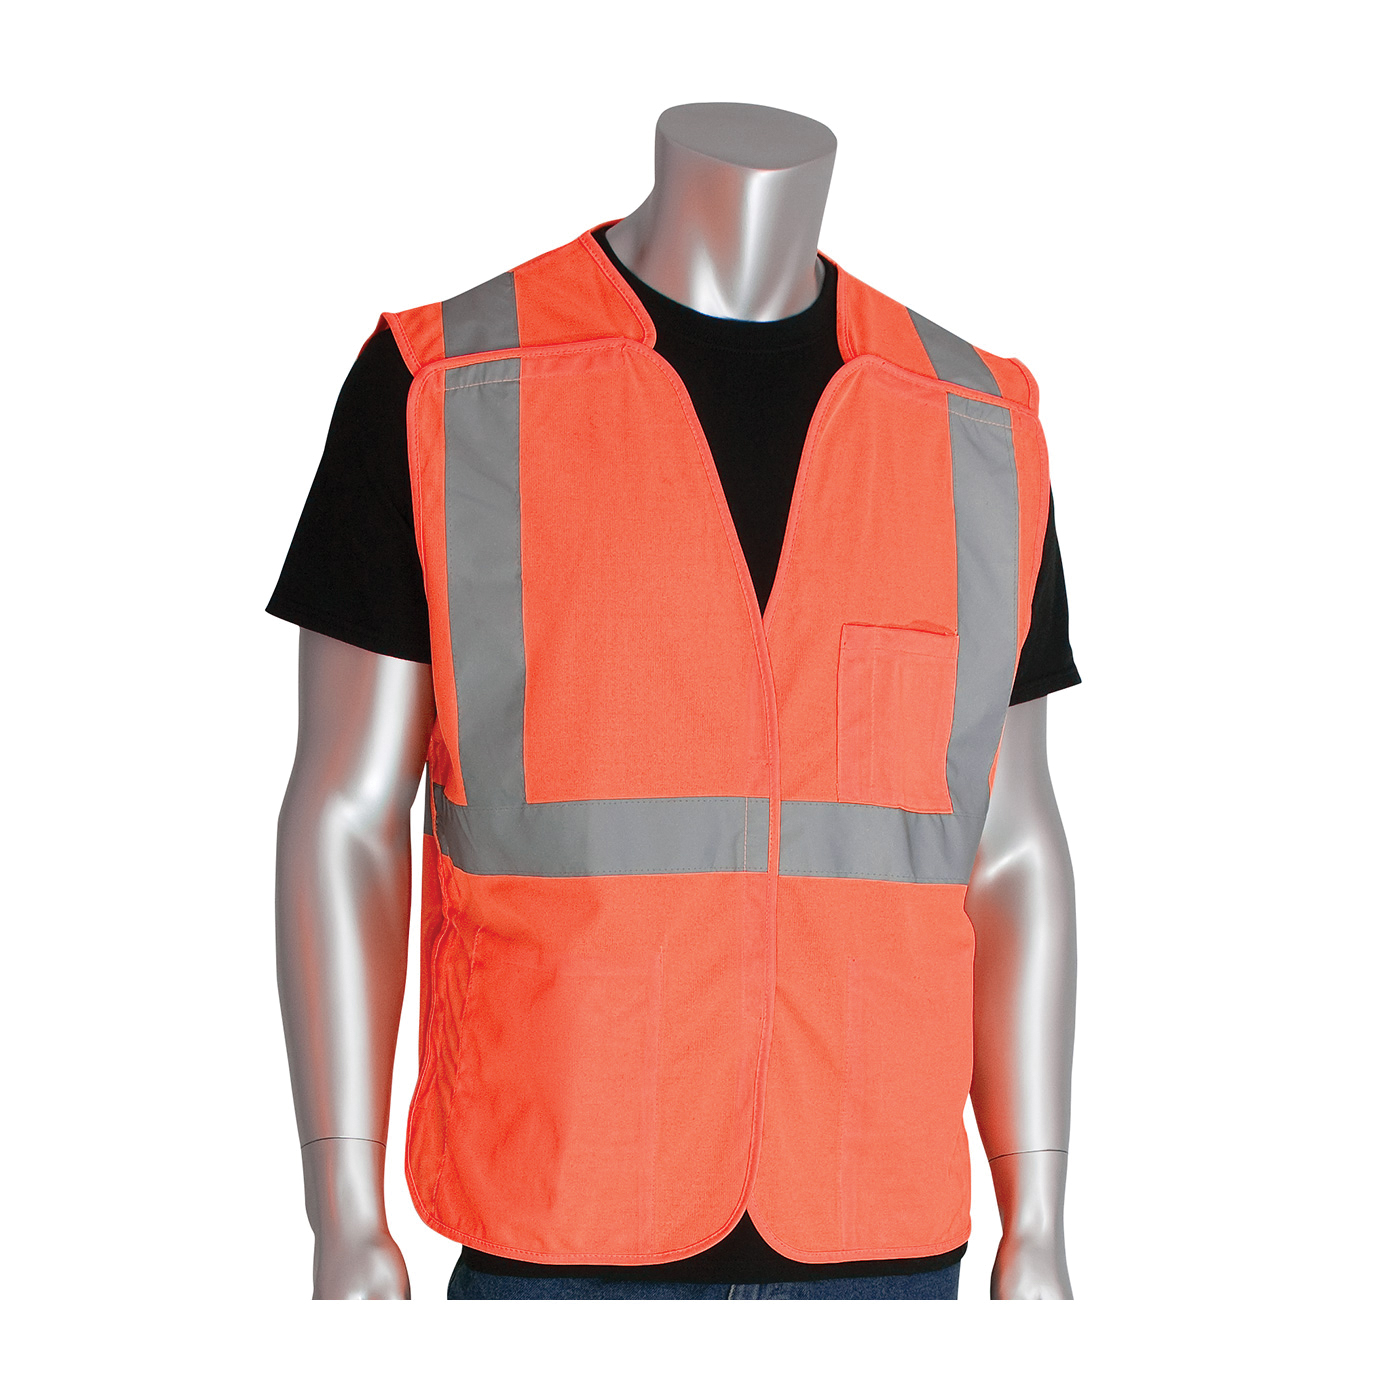 PIP® 302-5PVOR-2X Safety Vest, 2XL, Hi-Viz Orange, Polyester, Hook and Loop Closure, 3 Pockets, ANSI Class: Class 2, Specifications Met: ANSI 107 Type R